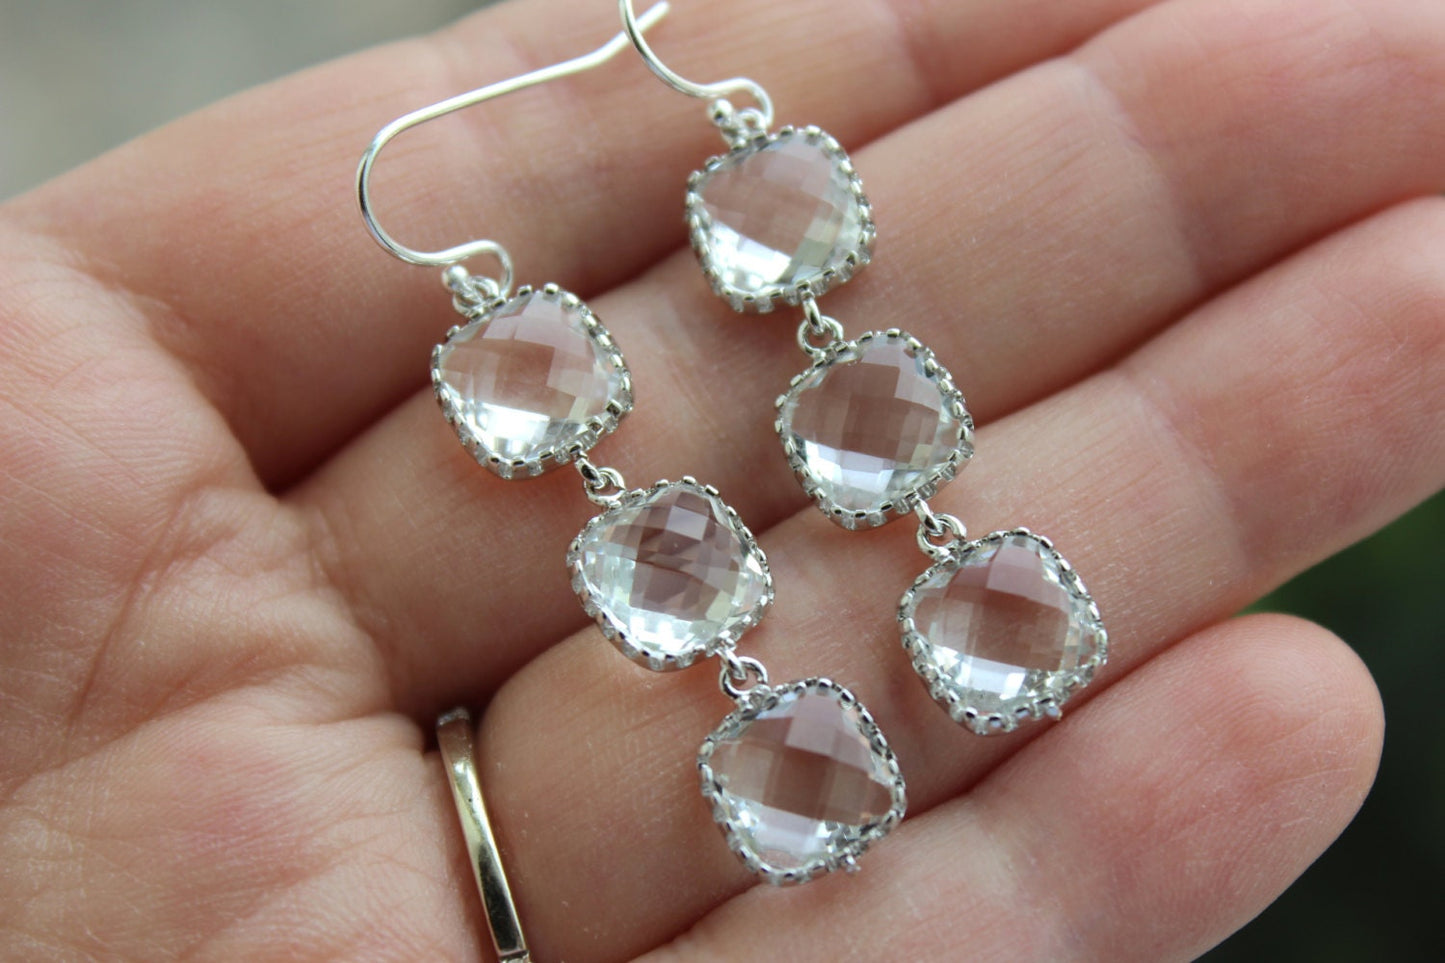 Silver Crystal Earrings Clear Square Jewelry - Bridesmaid Earrings - Bridal Earrings - Crystal Wedding Jewelry - Clear Bridesmaid Gift